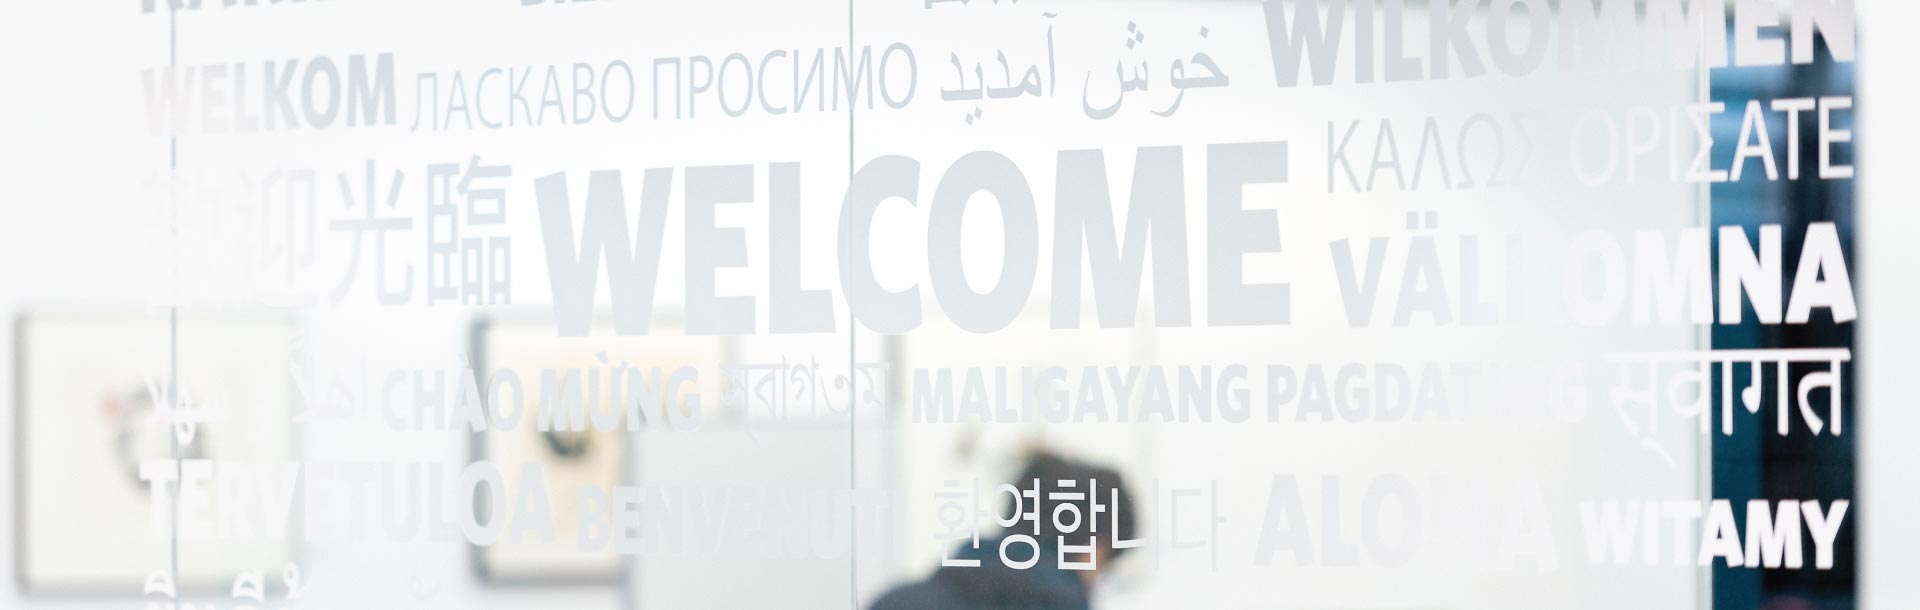 Welcome mural